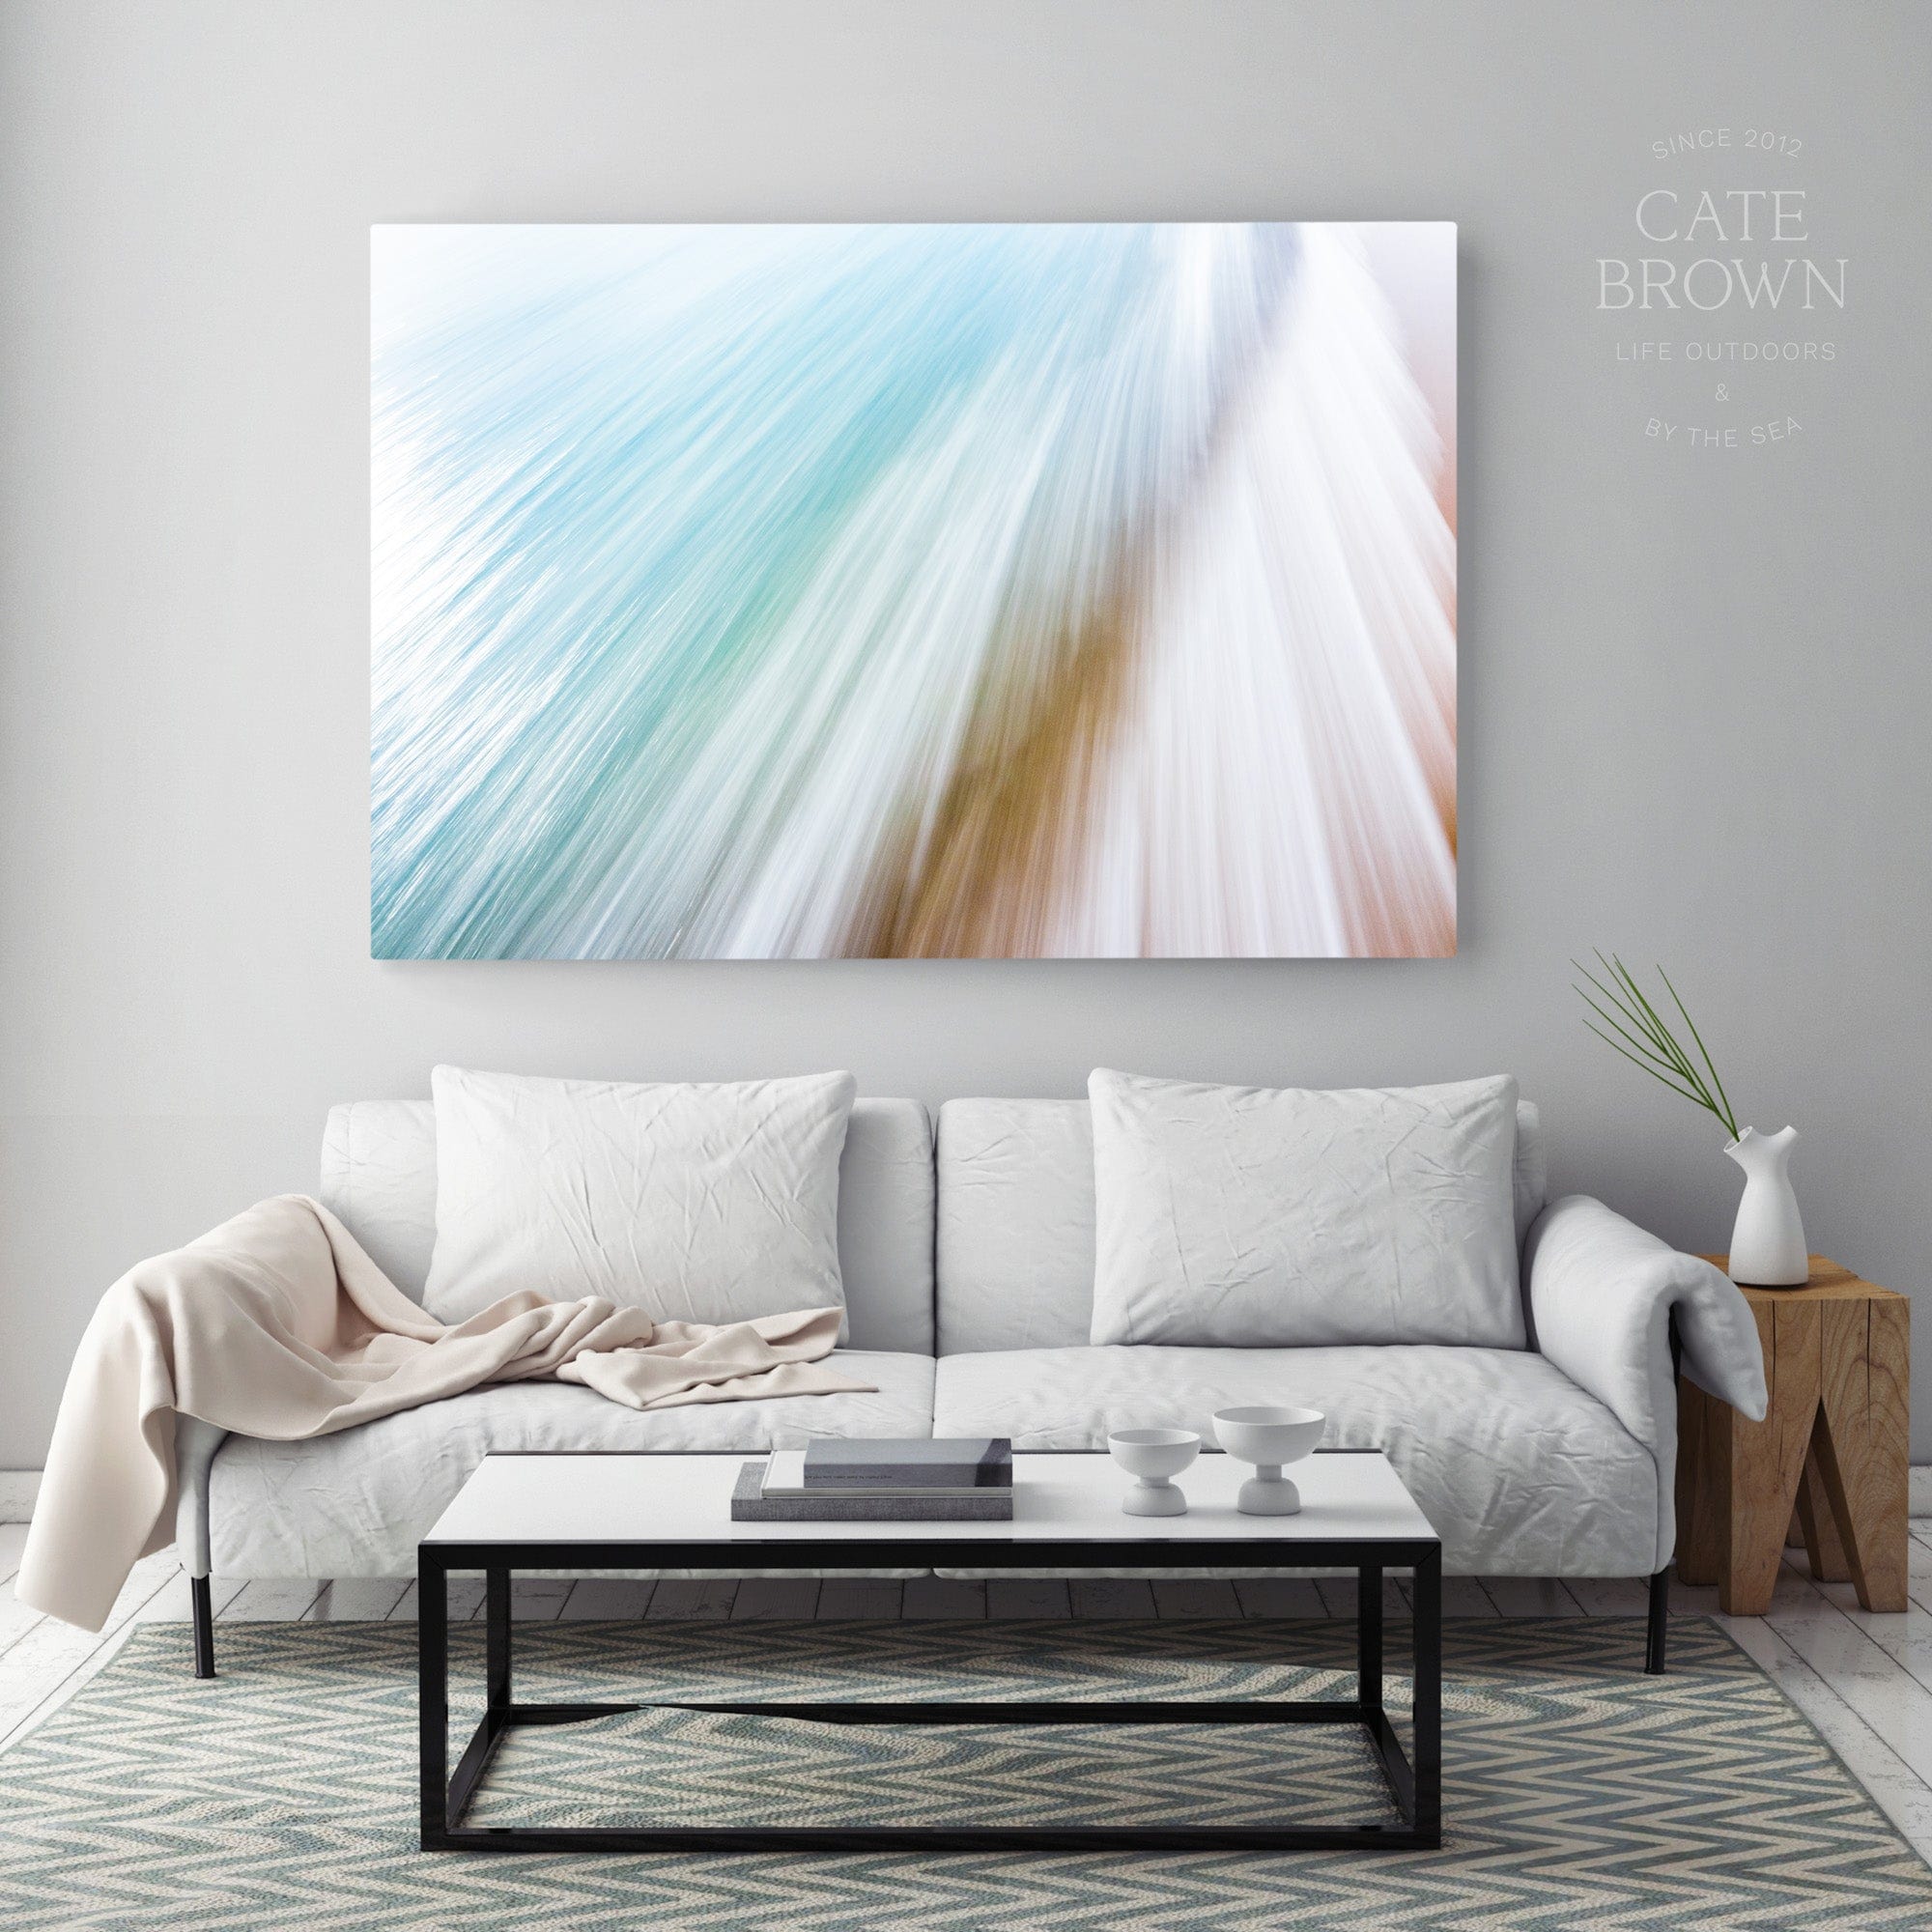 Cate Brown Photo Canvas / 16"x24" / None (Print Only) East Matunuck #3  //  Abstract Photography Made to Order Ocean Fine Art